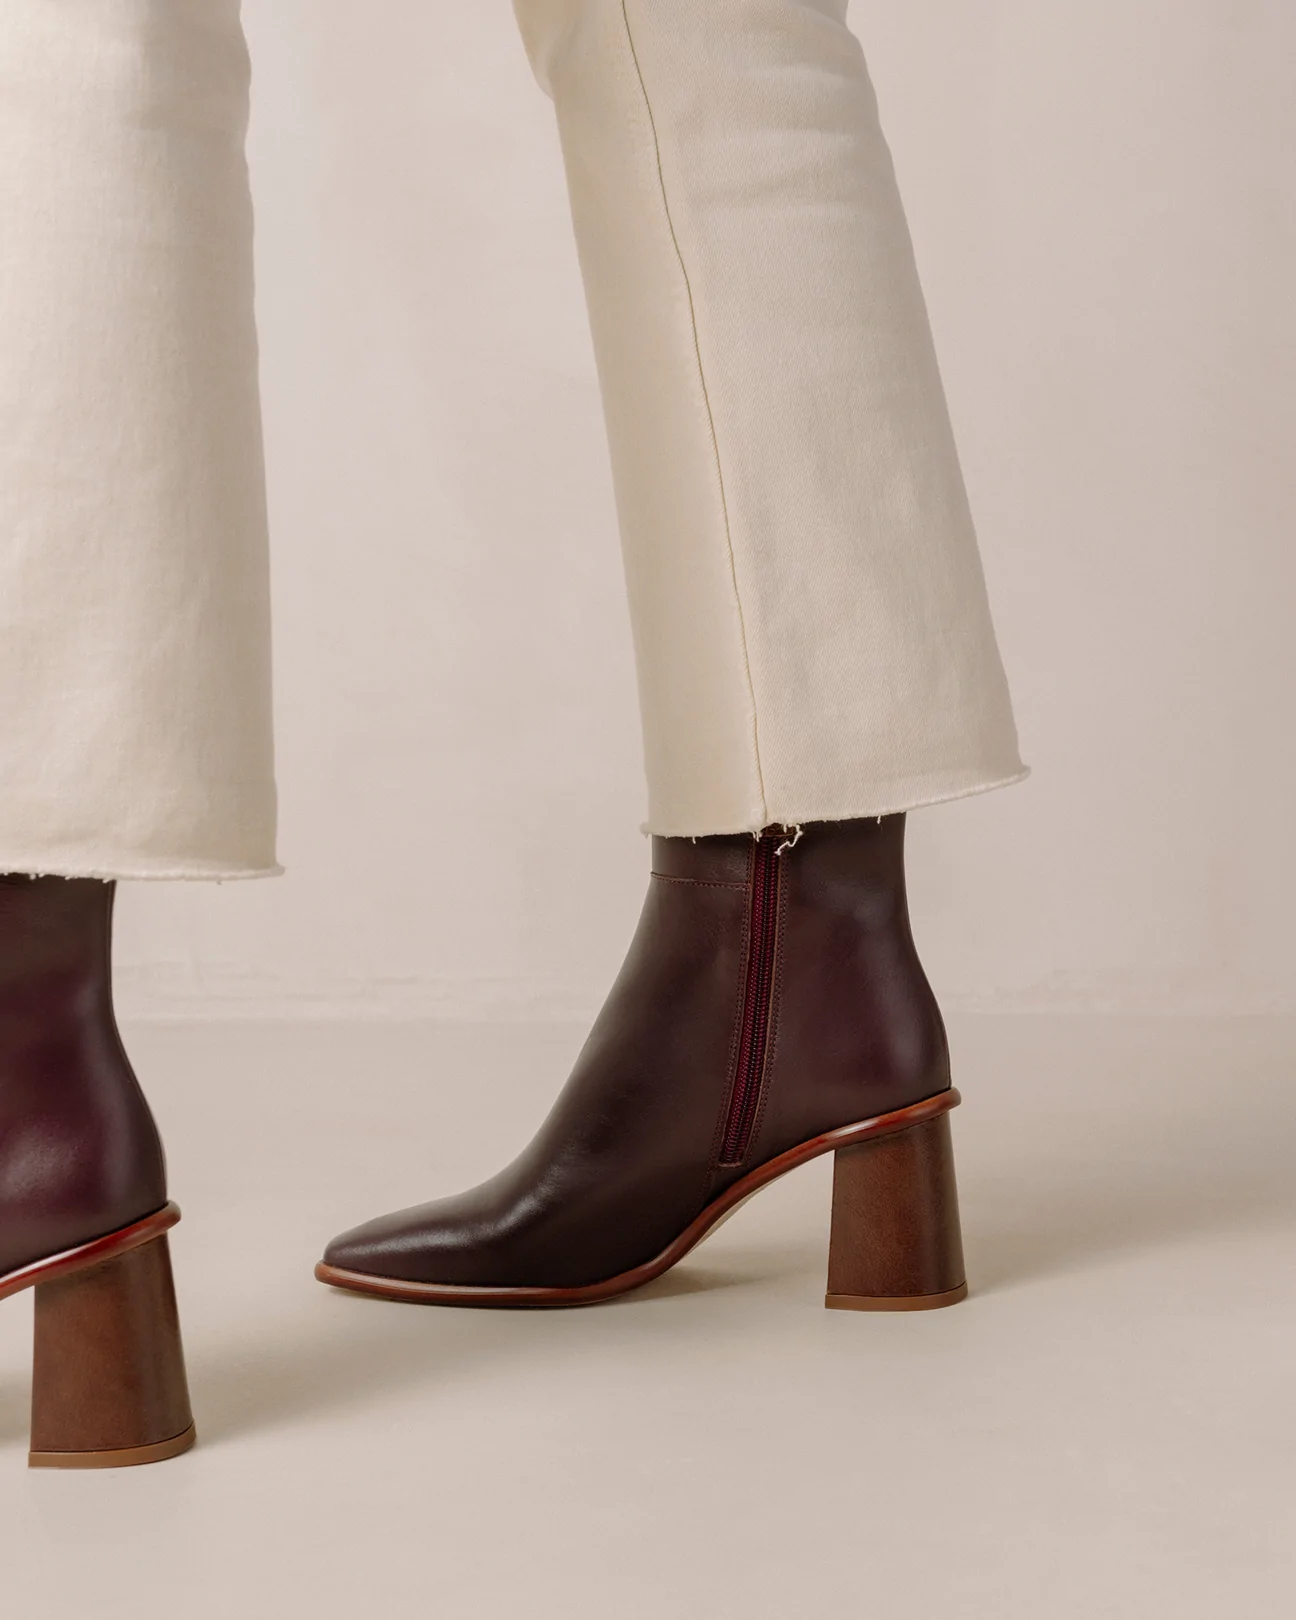 Stylish Ways to Wear Brown Ankle Boots